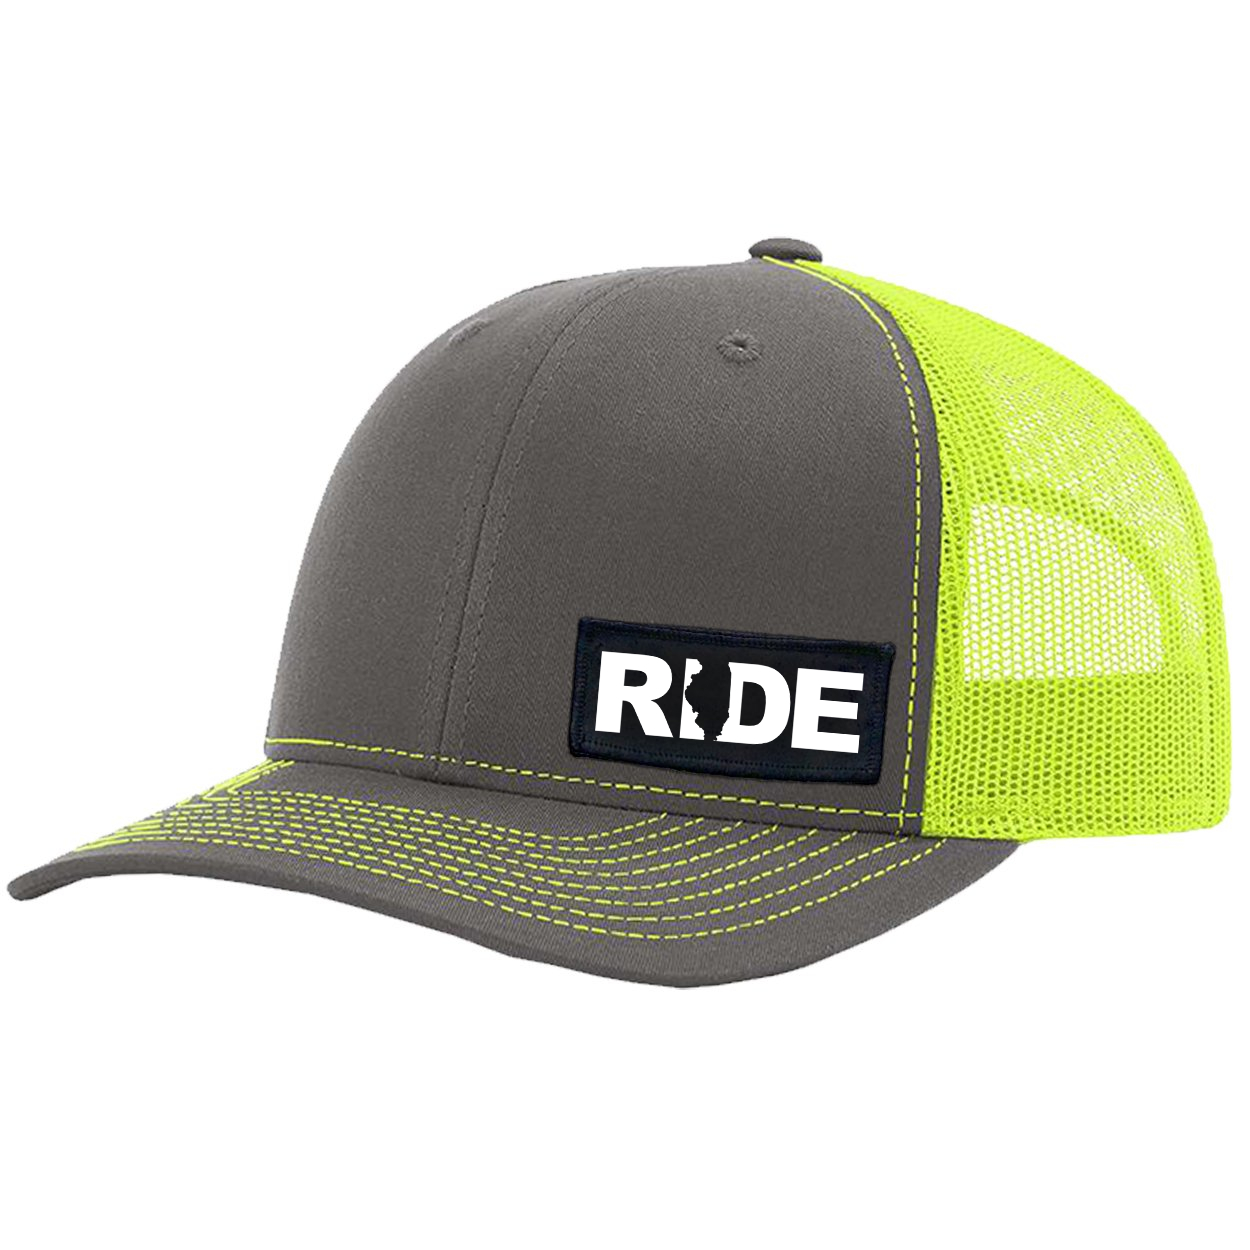 Ride Illinois Night Out Woven Patch Snapback Trucker Hat Charcoal/Neon Yellow (White Logo)